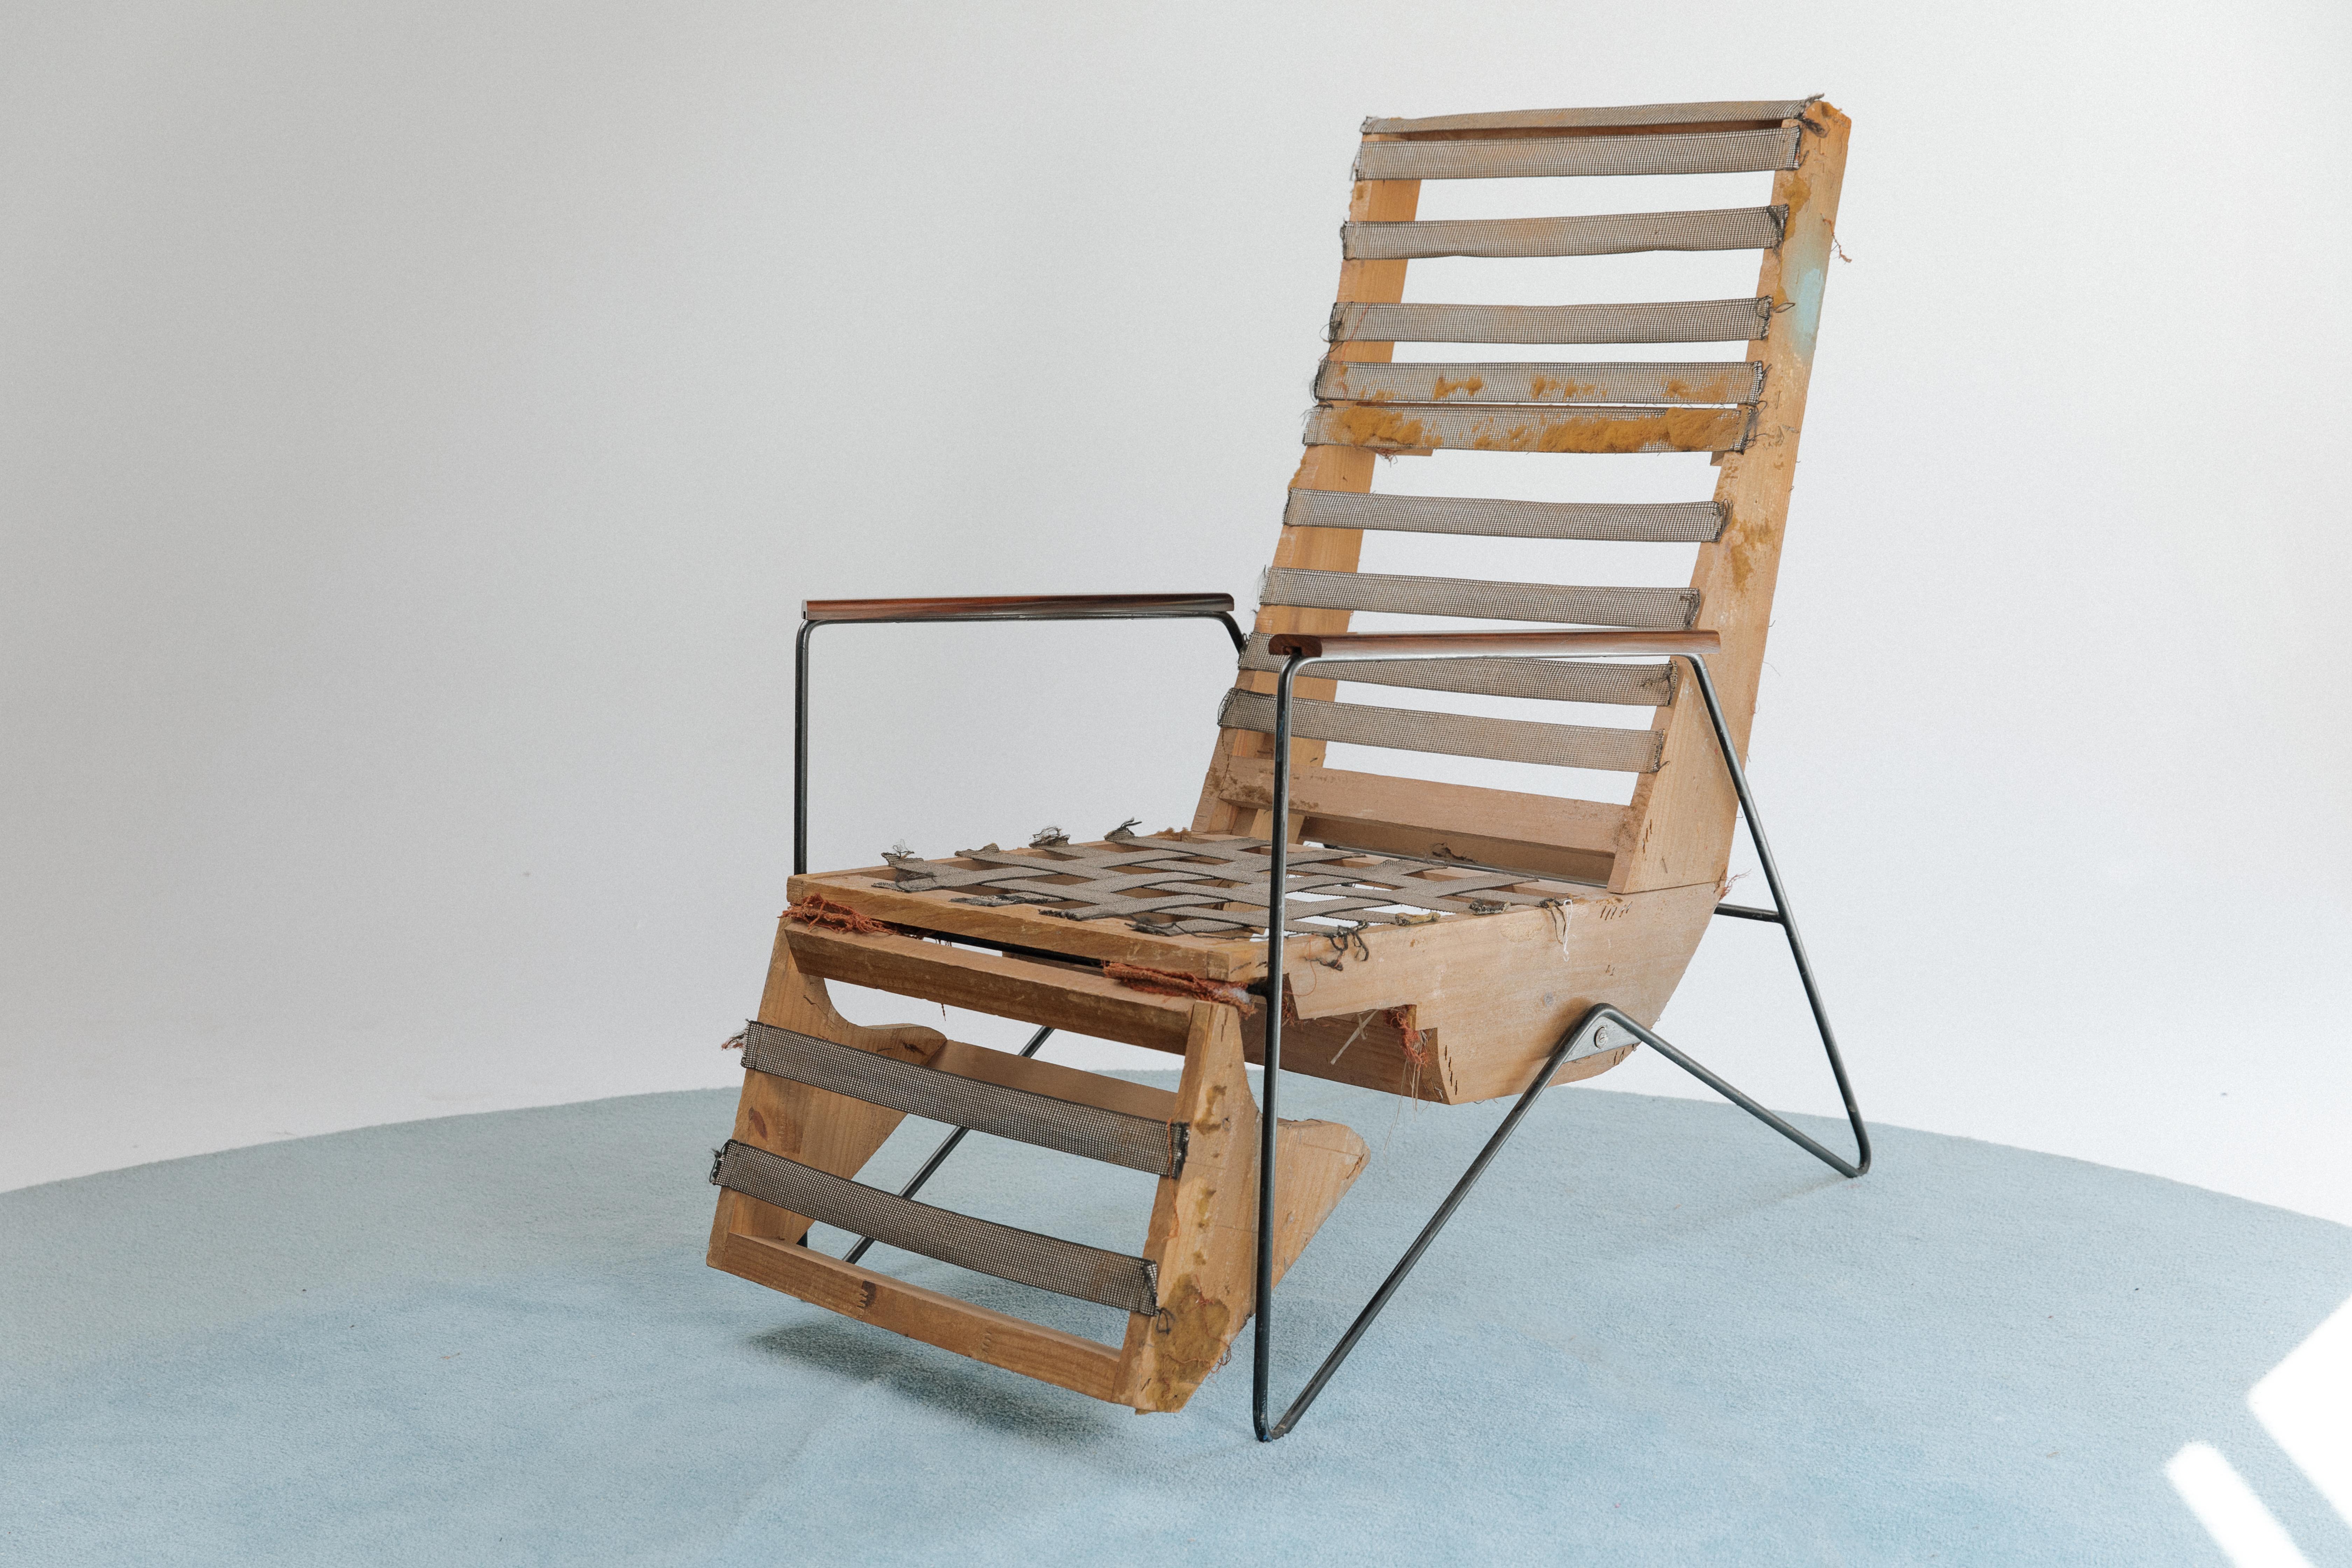 Reclining lounge chair by Ernesto Hauner for Ernesto Hauner & cia. The chair stands on thin metal legs and has wooden armrests. The upholstery has been removed, exposing the pinus frame and the wonderful and original rubber tire straps. When